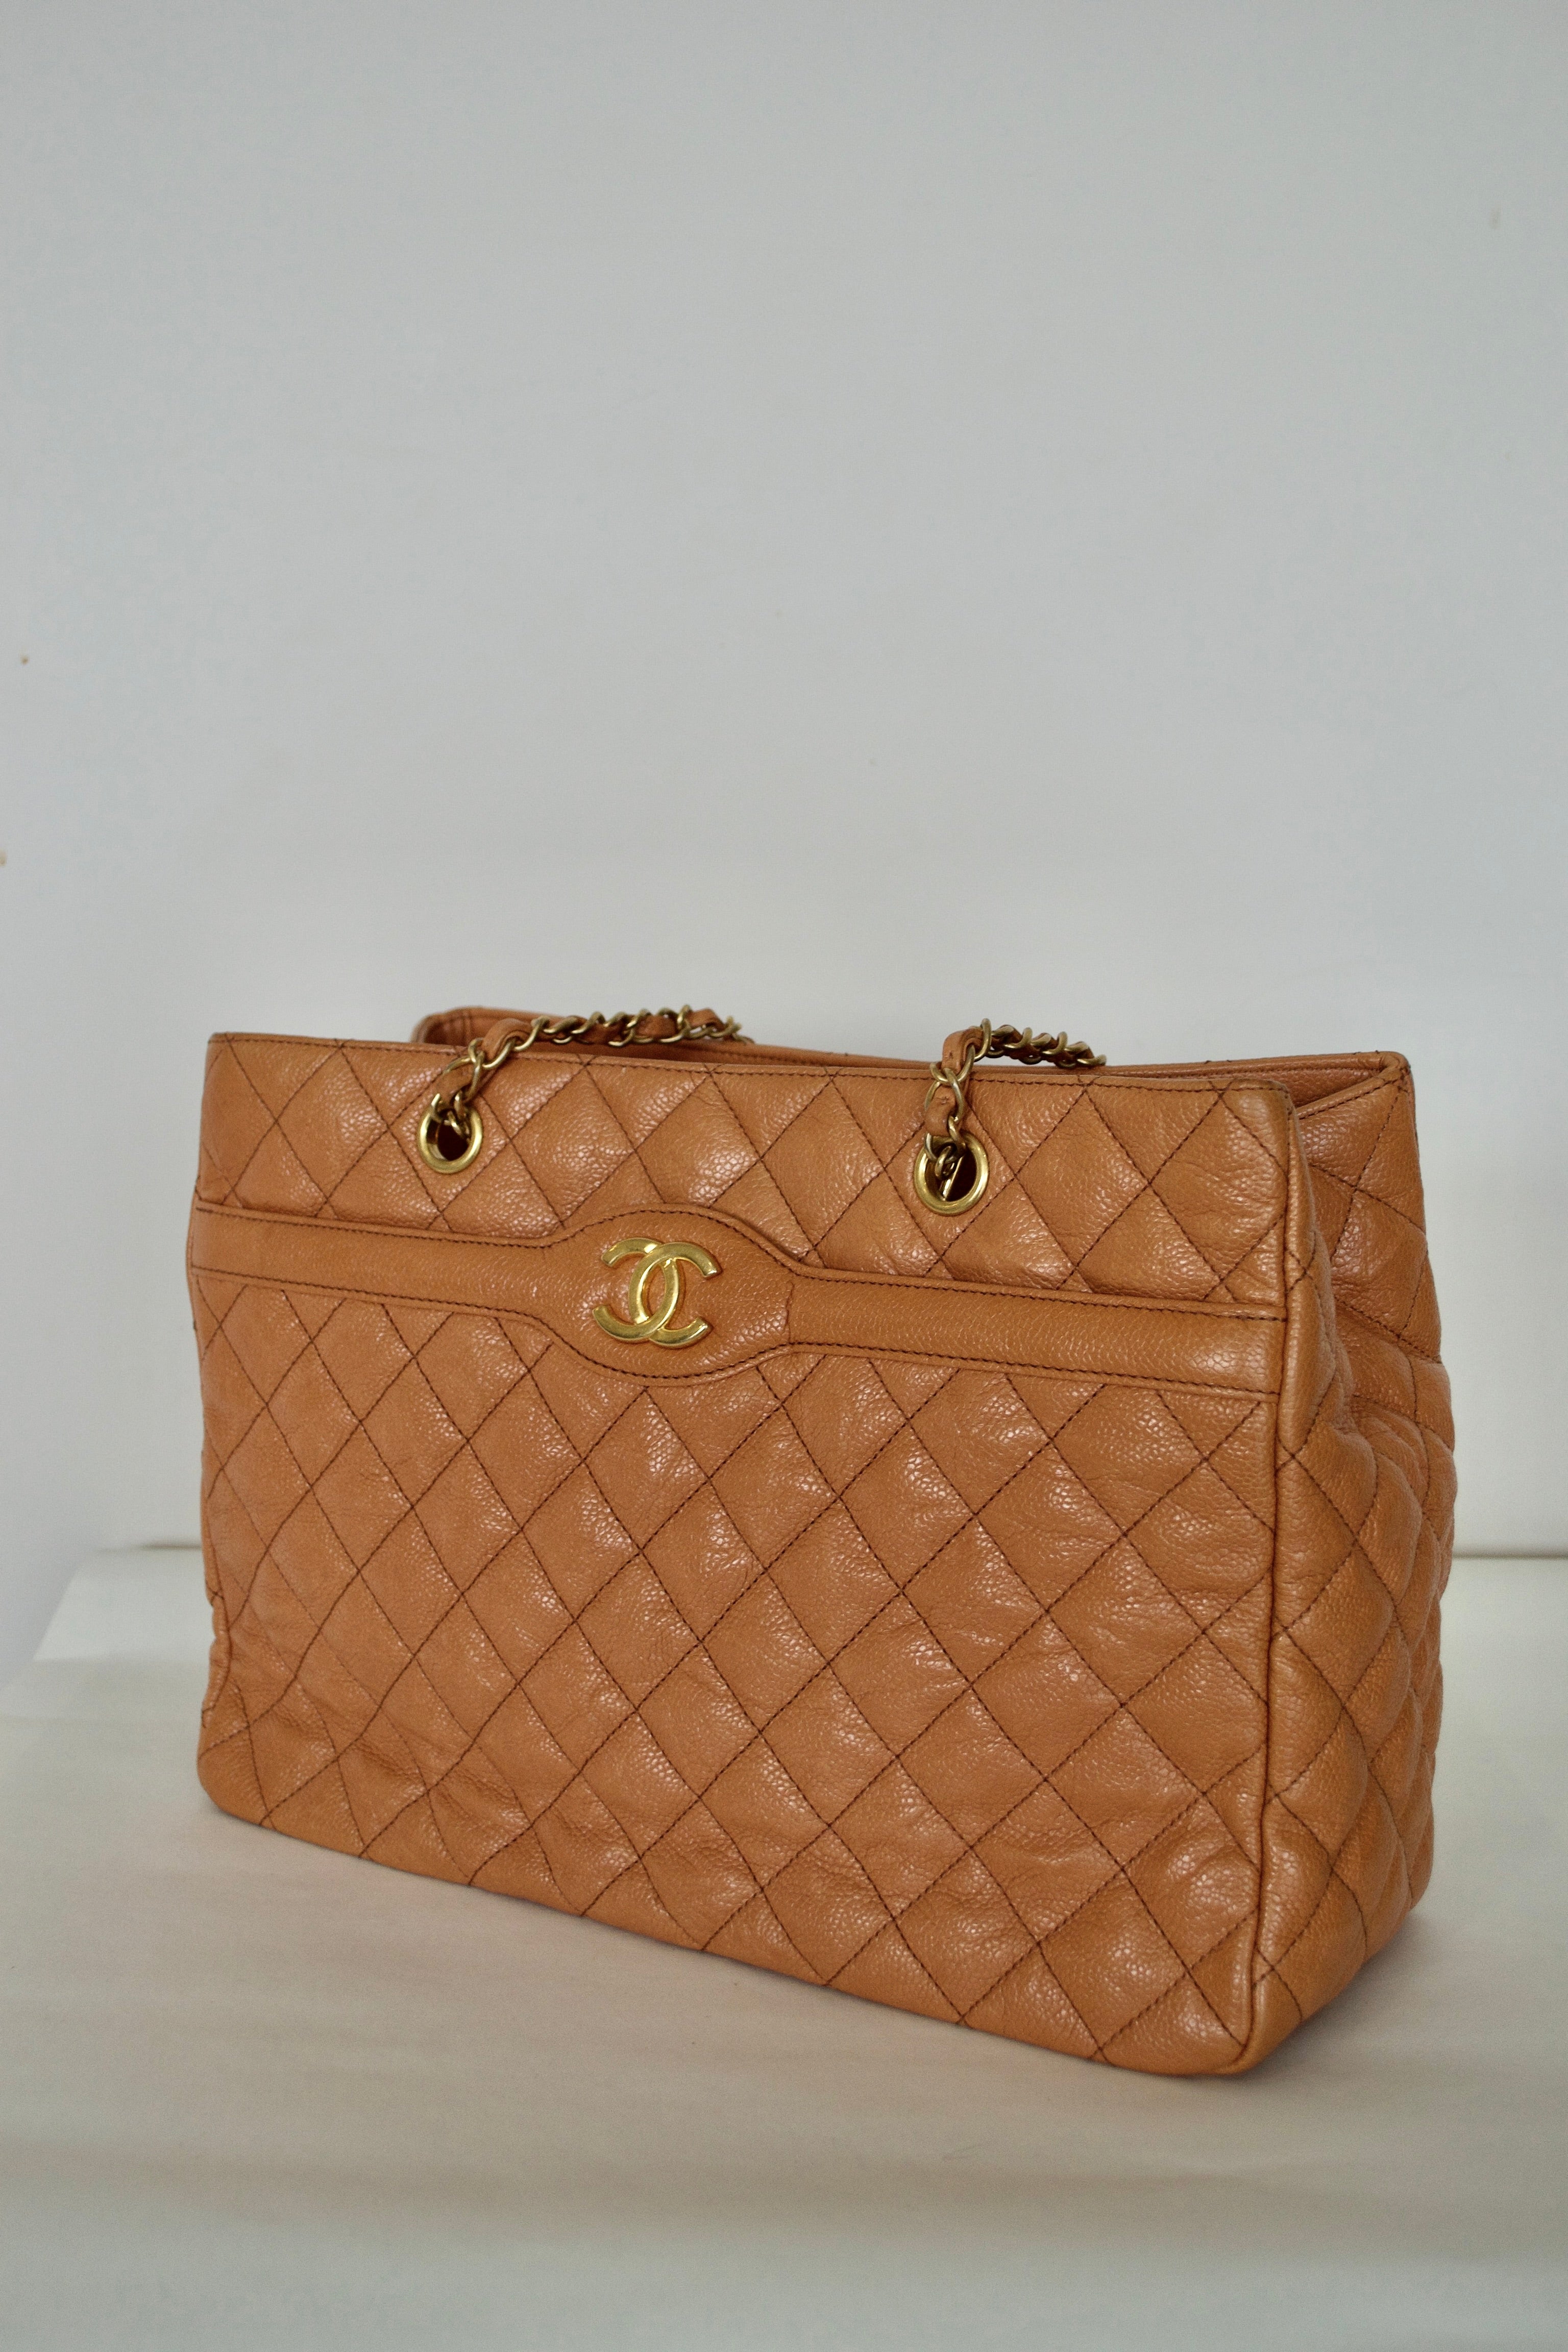 Chanel  Tan Quilted Bag